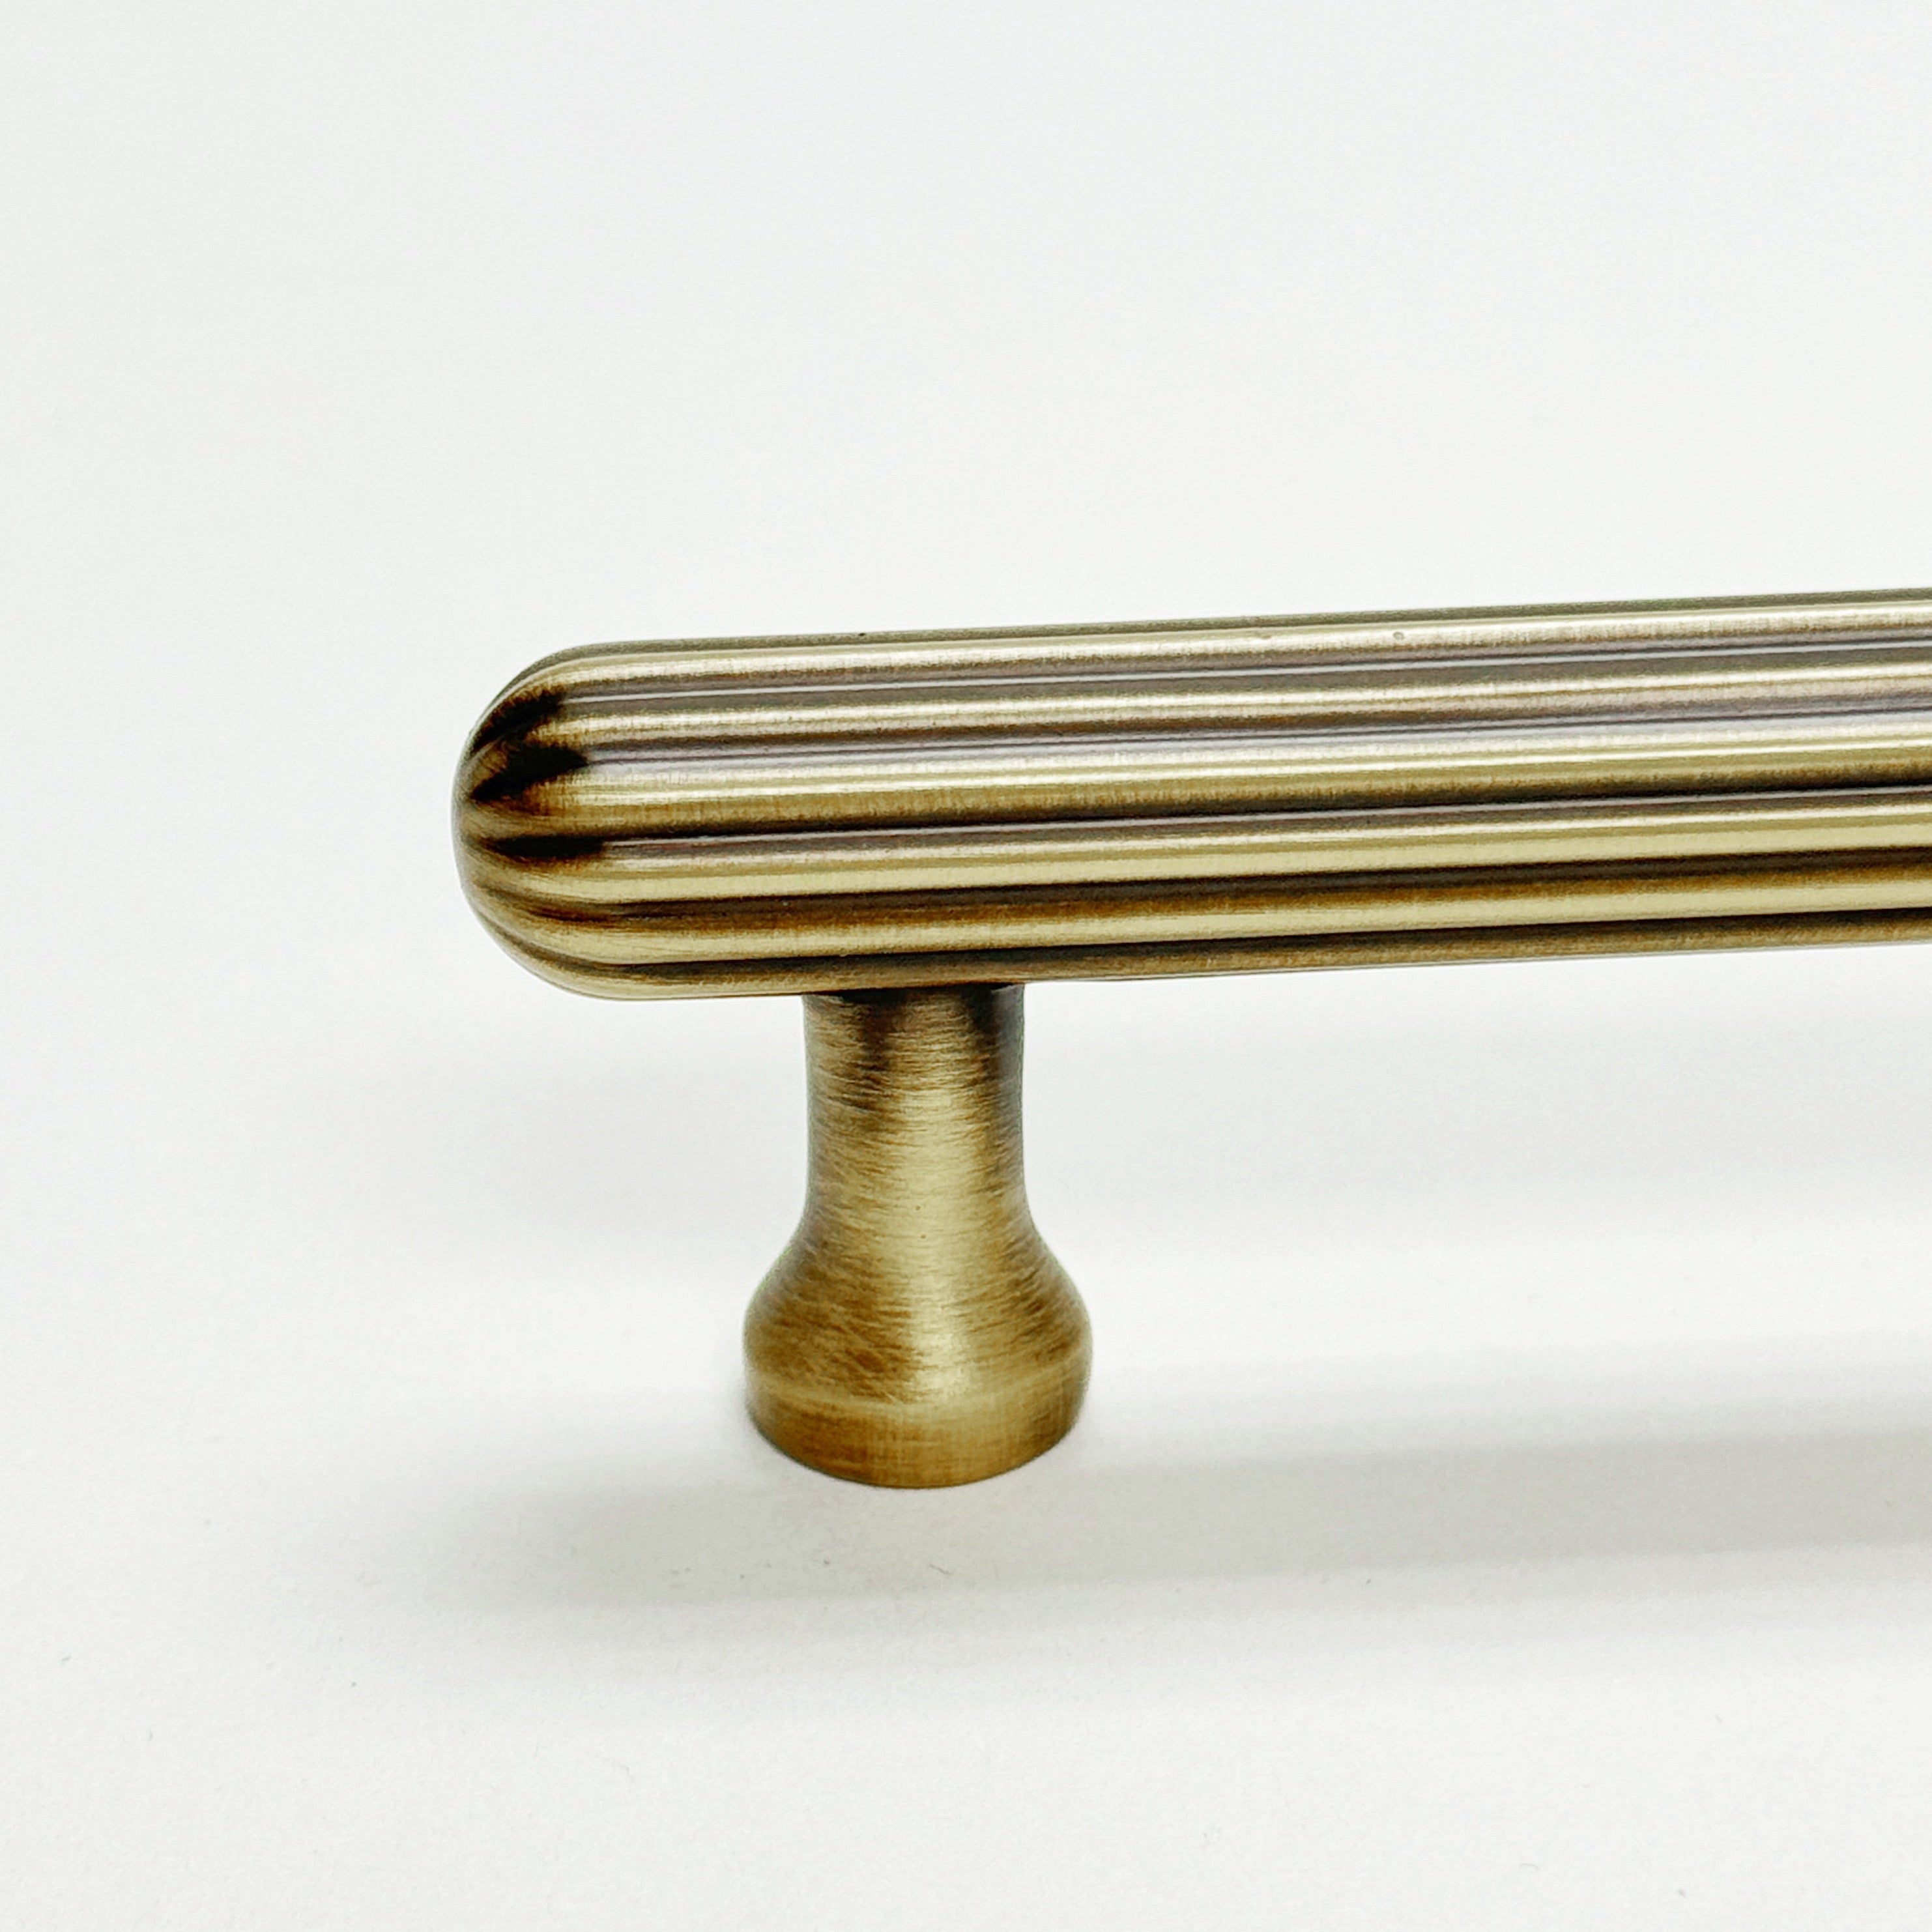 Fluted Antique Brass "Jewel" Ridge Cabinet Knobs and Pulls - Industry Hardware